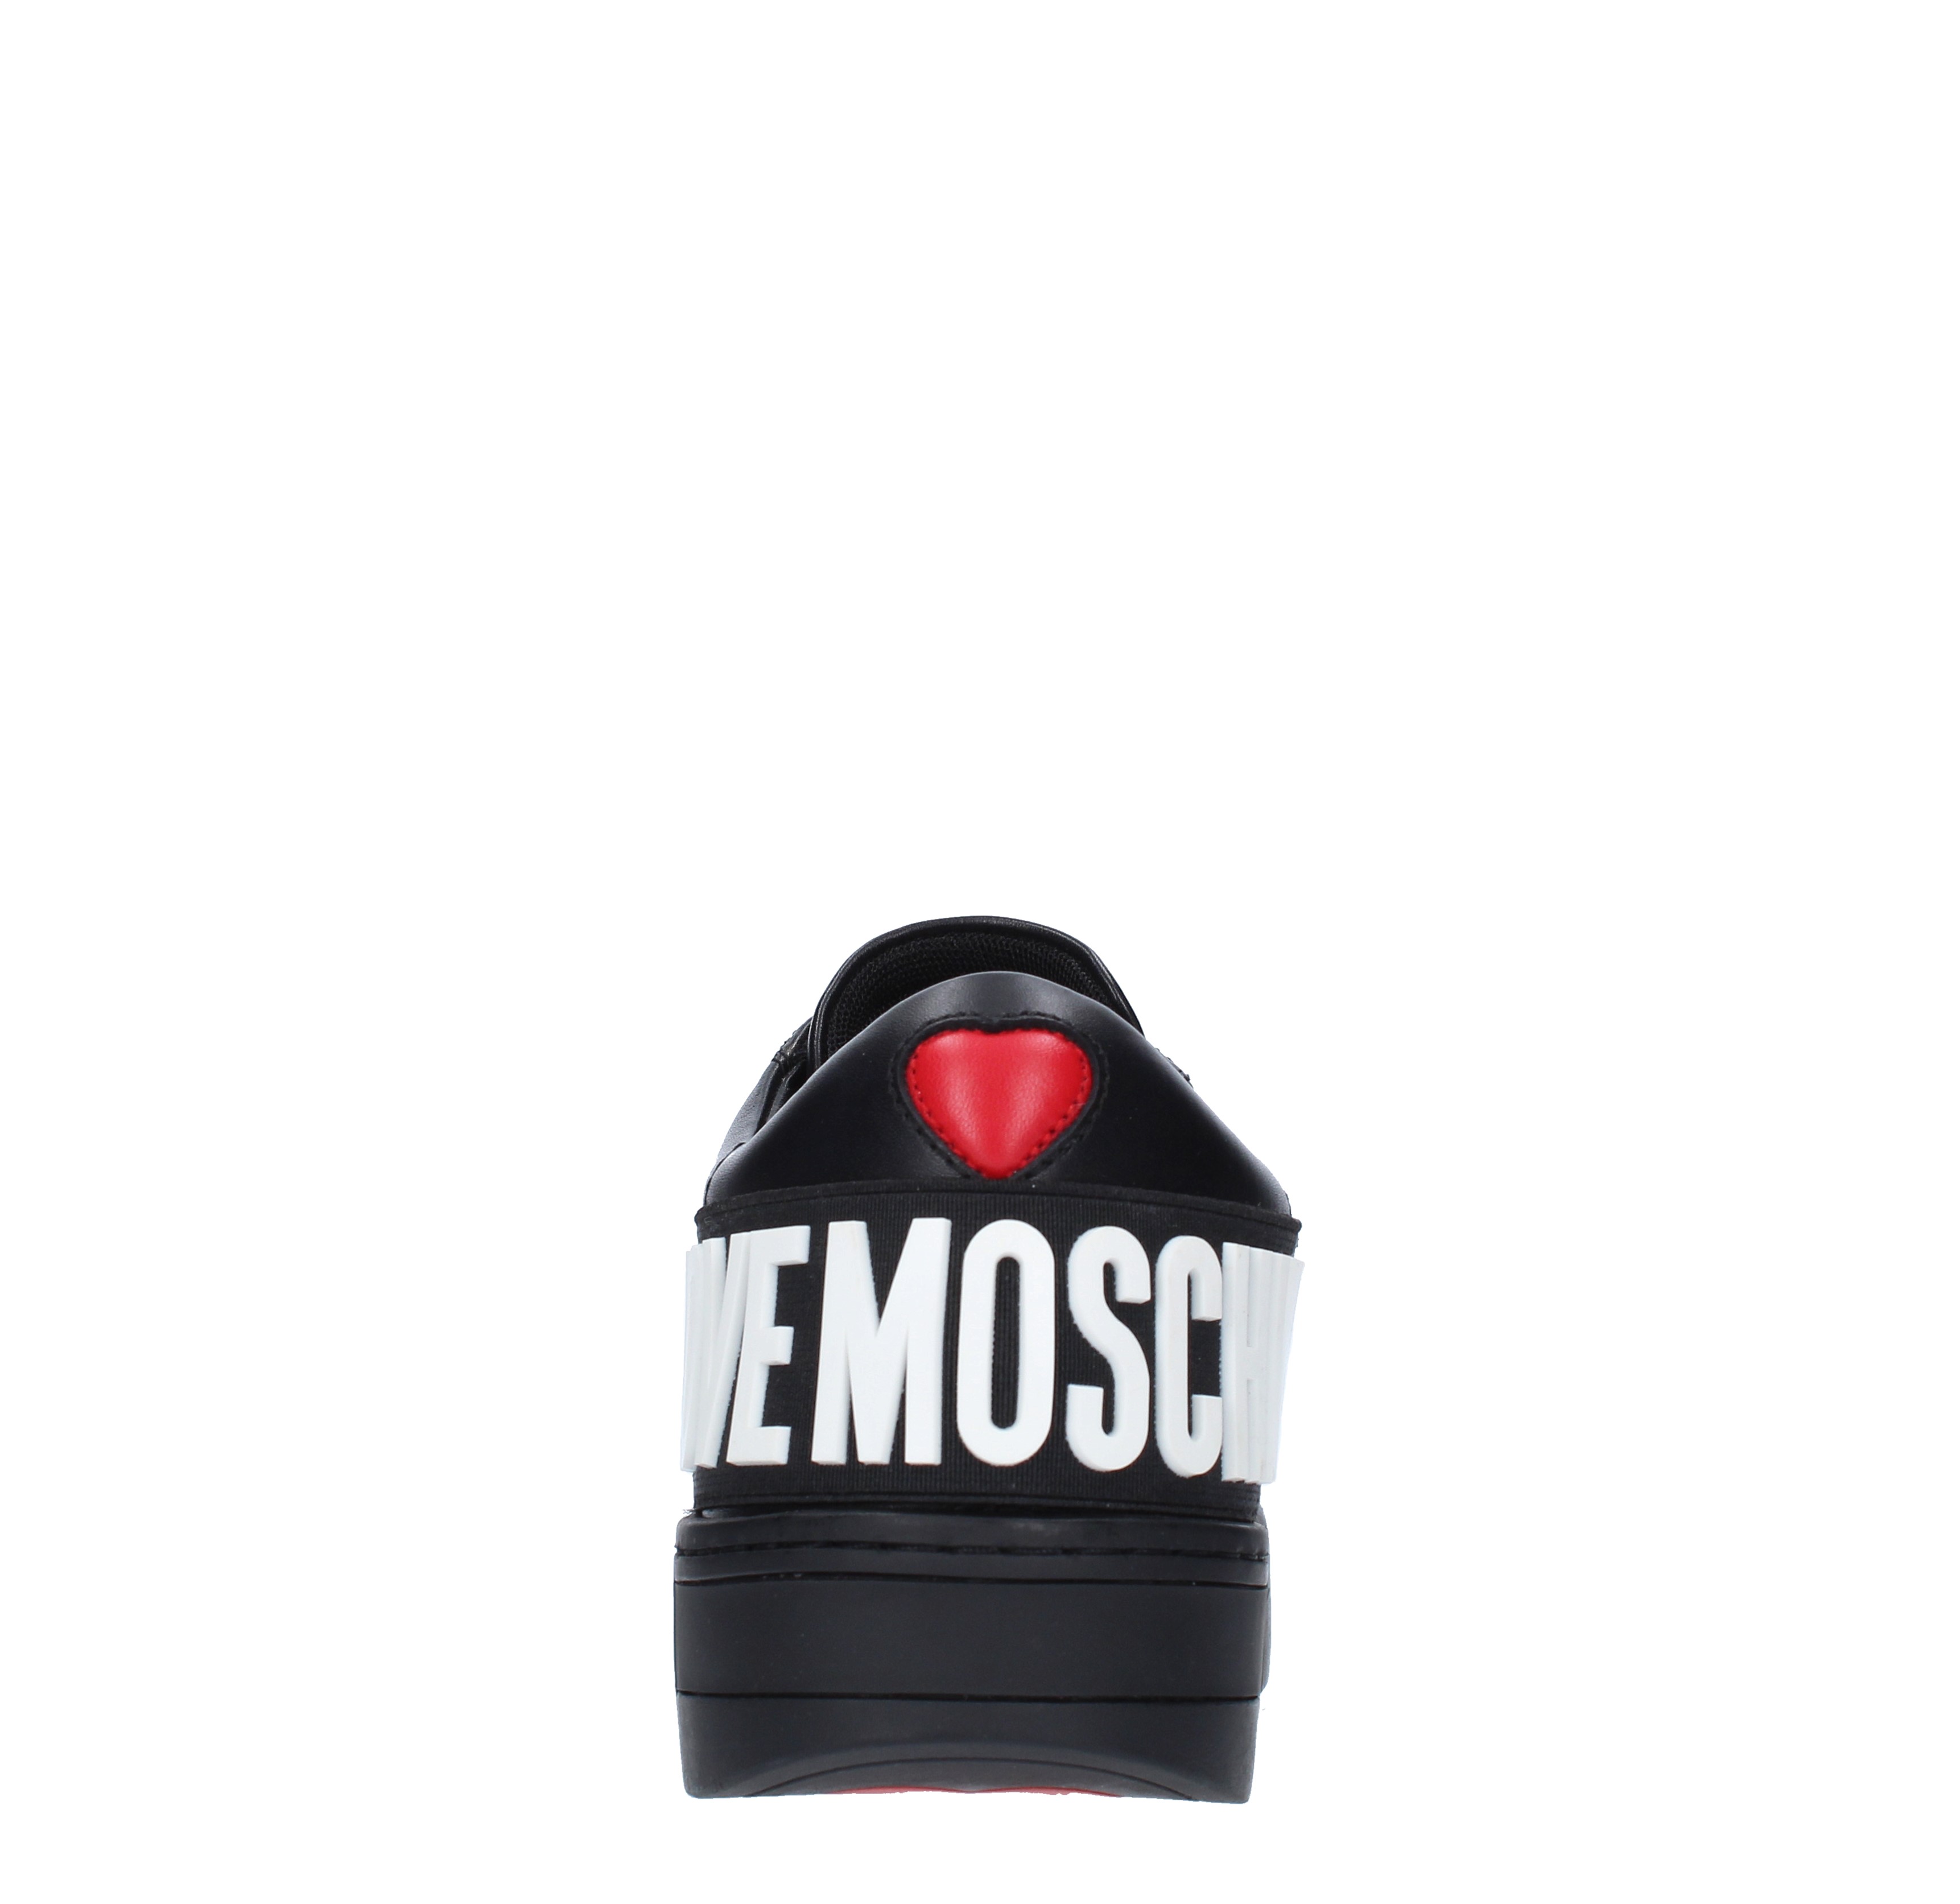 Sneakers in leather, fabric and other materials LOVE MOSCHINO | 15573G0DIA0000NERO